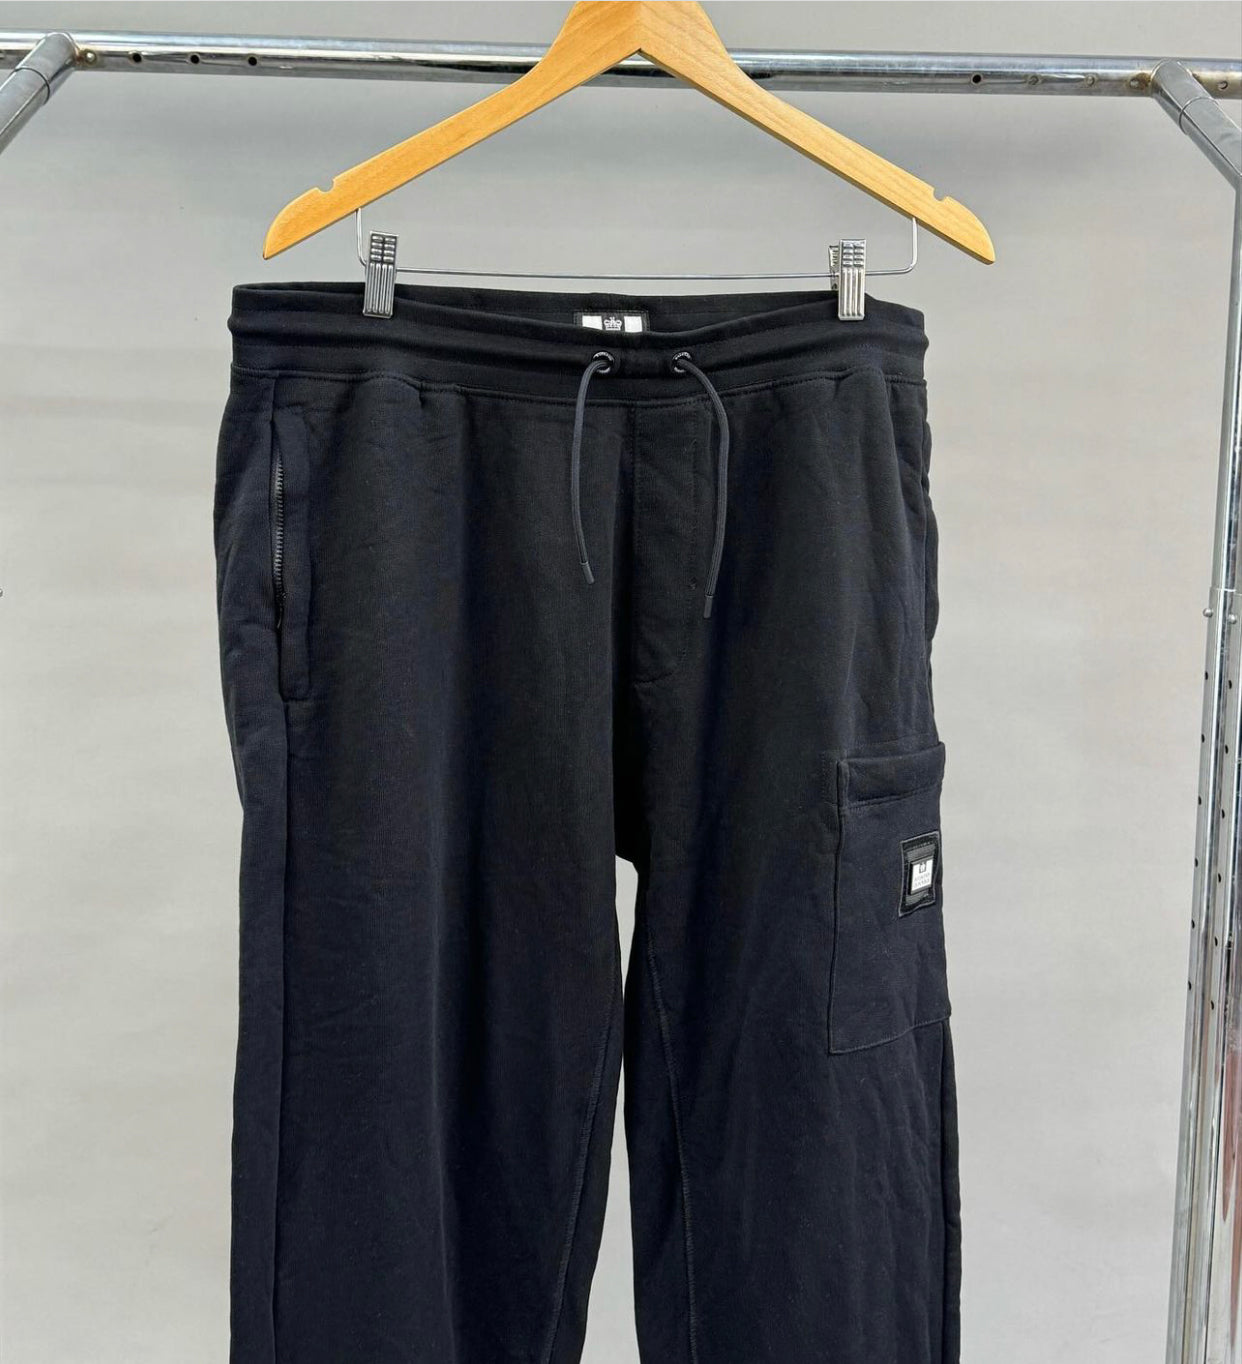 Weekend offender jogger pant in black